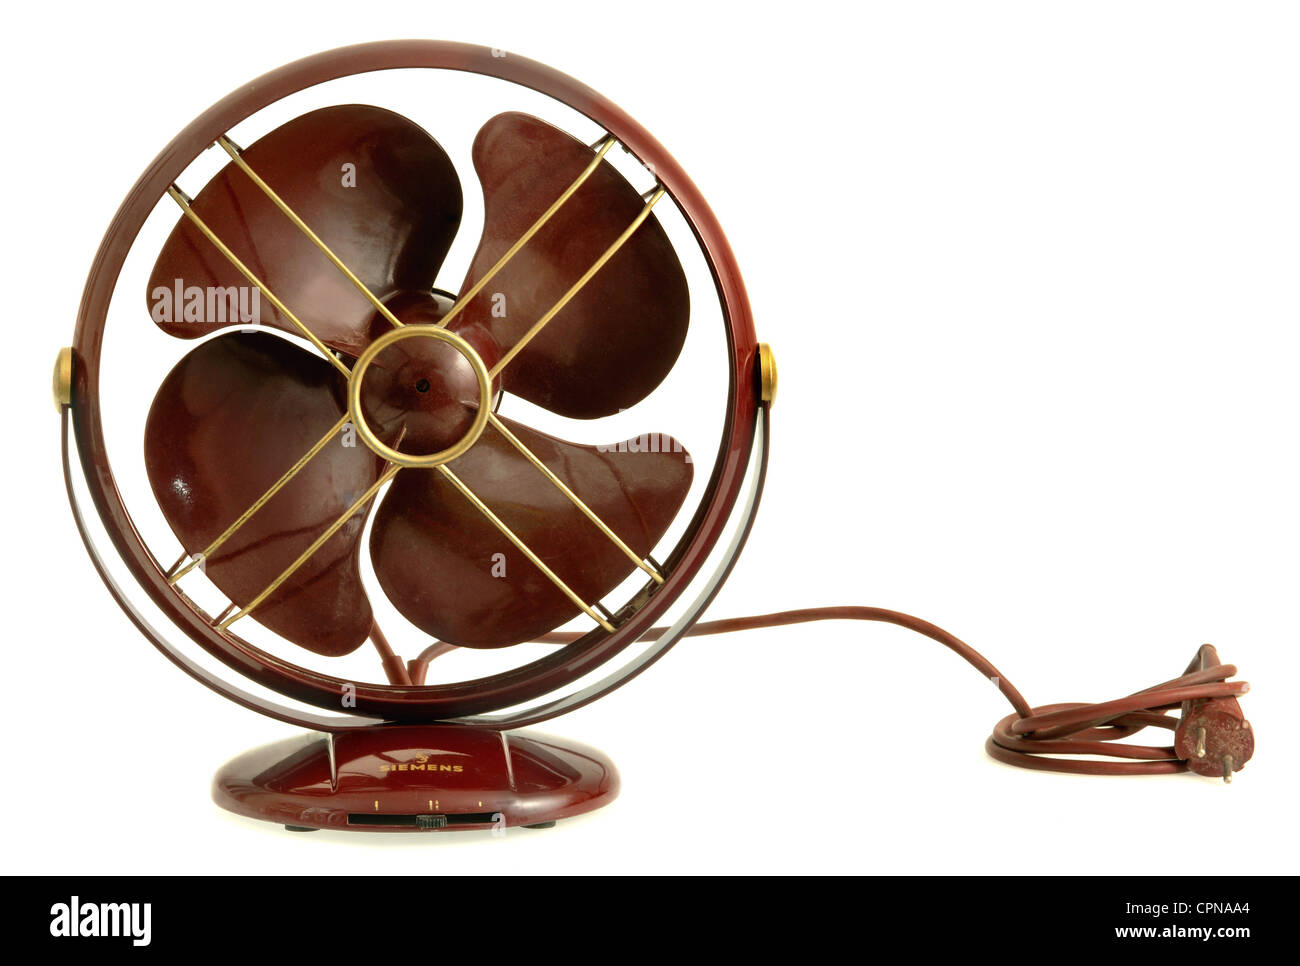 technics, ventilator, table fan by Siemens, bakelite, Germany, circa 1953, Additional-Rights-Clearences-Not Available Stock Photo